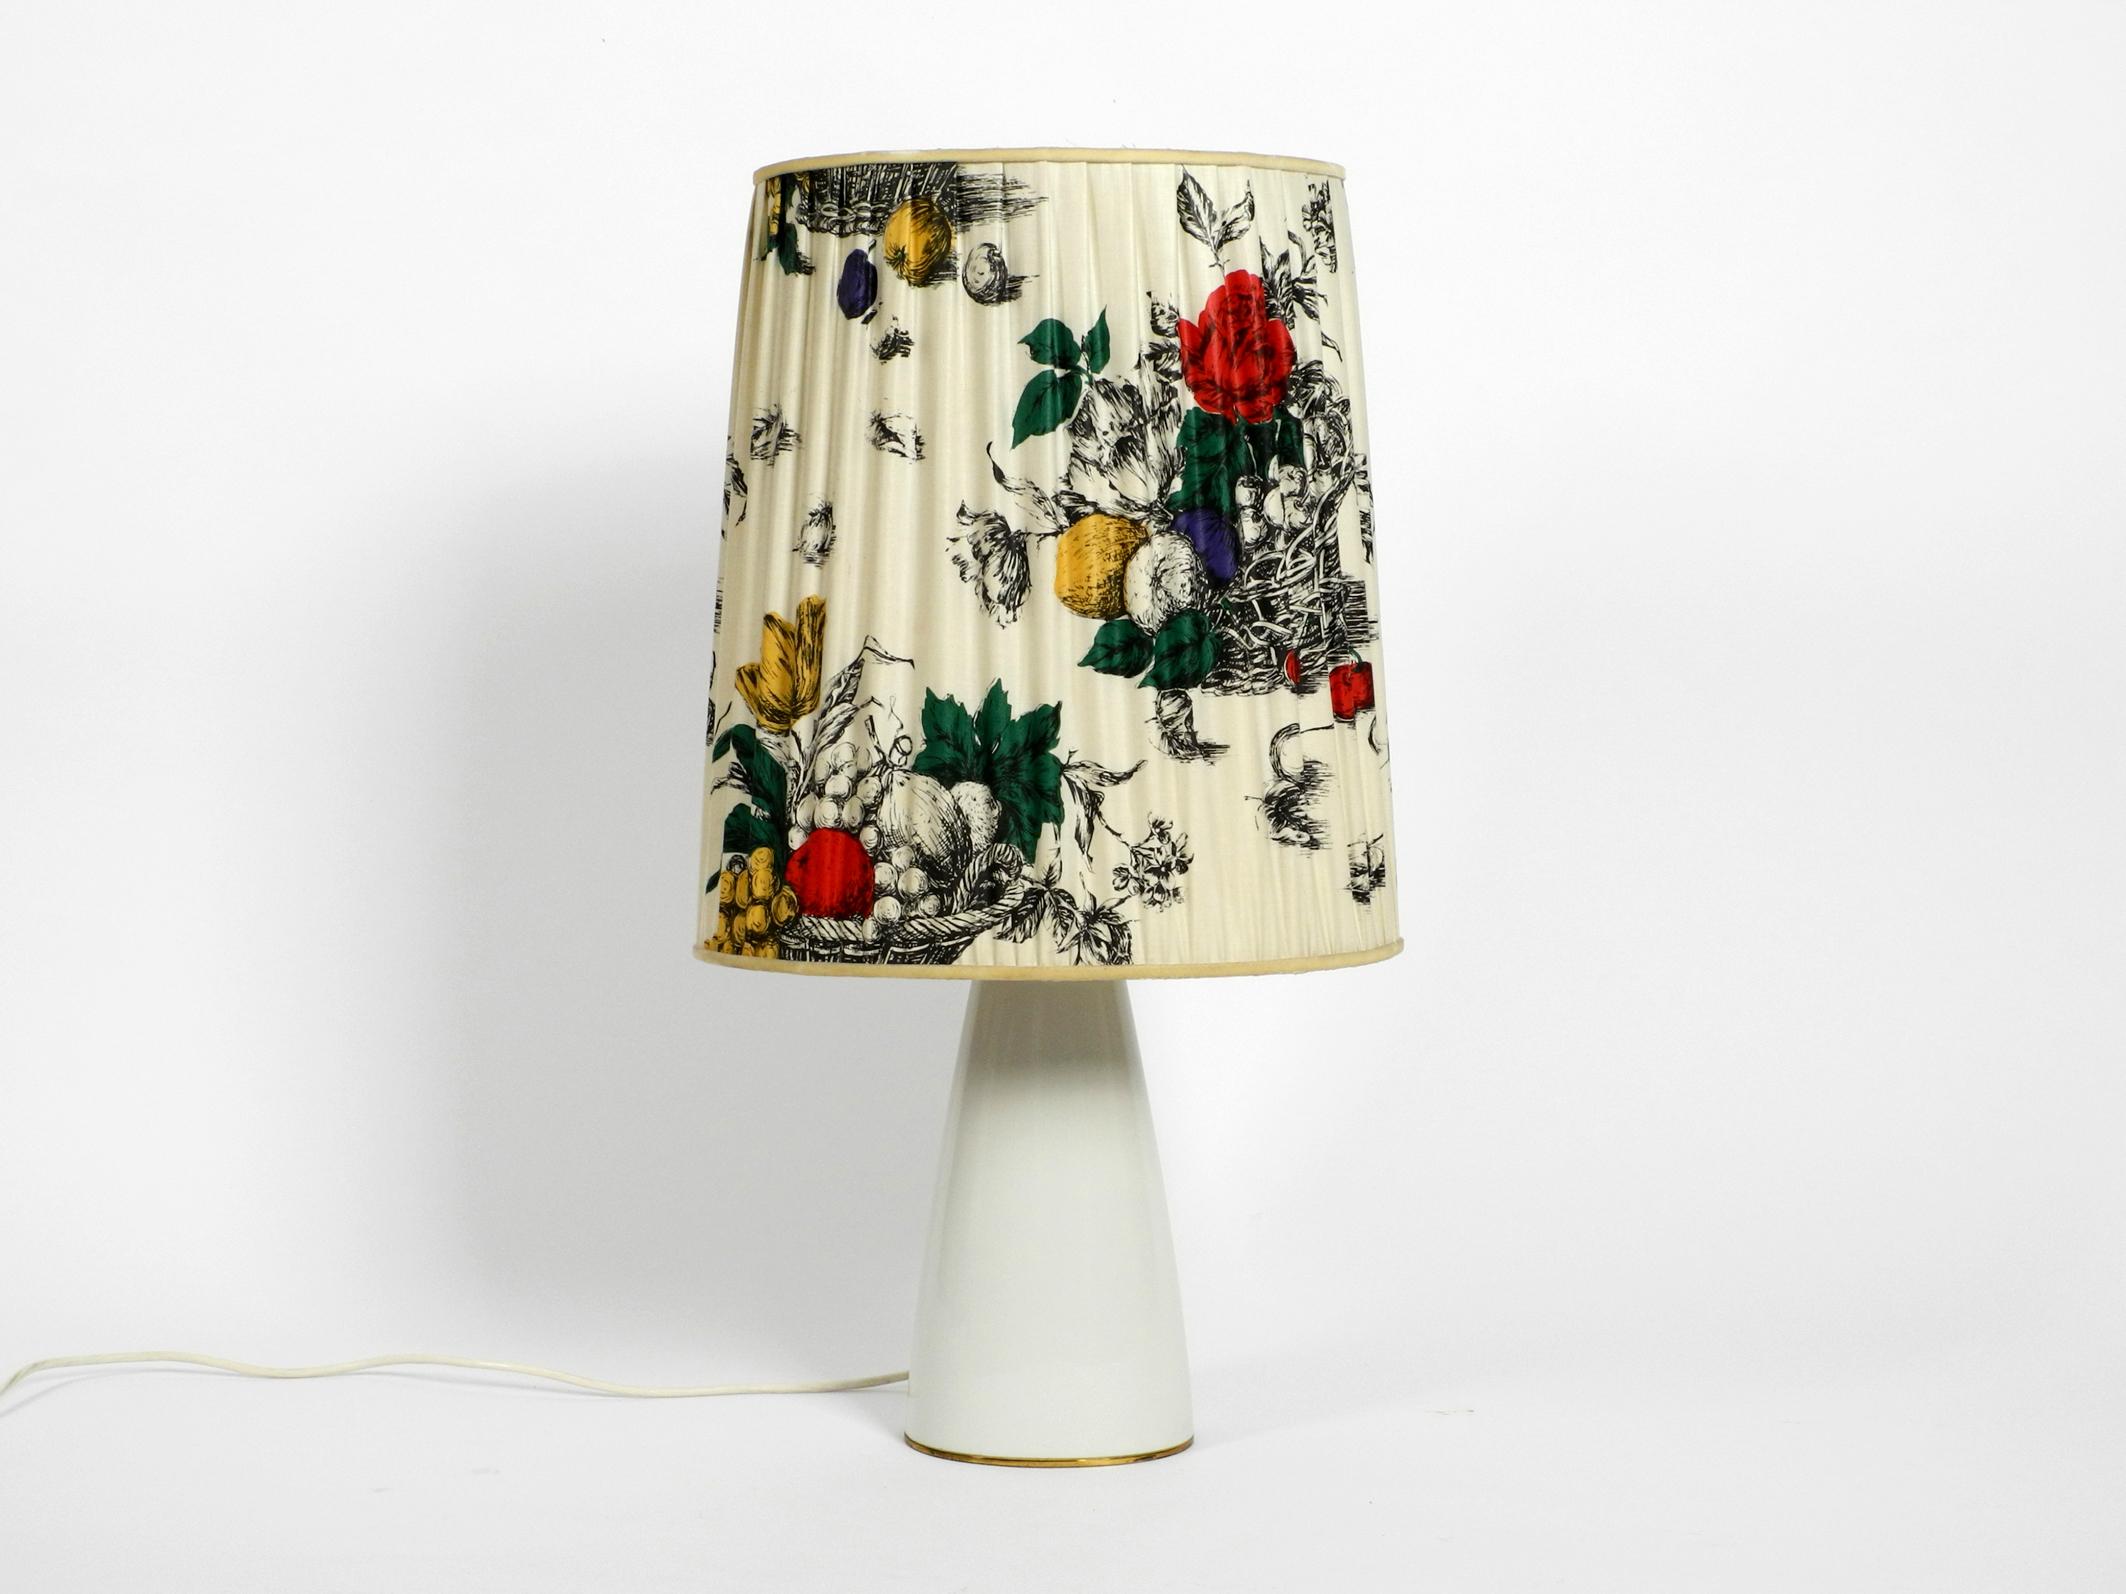 Large elegant 1960s KPM table lamp with porcelain foot and pleated silk lampshade.
Manufacturer is Königliche Porzellan-Manufaktur (KPM) Berlin. 
Very elegant and high quality design.
The lamp foot is made of shiny white porcelain.
The foot, the